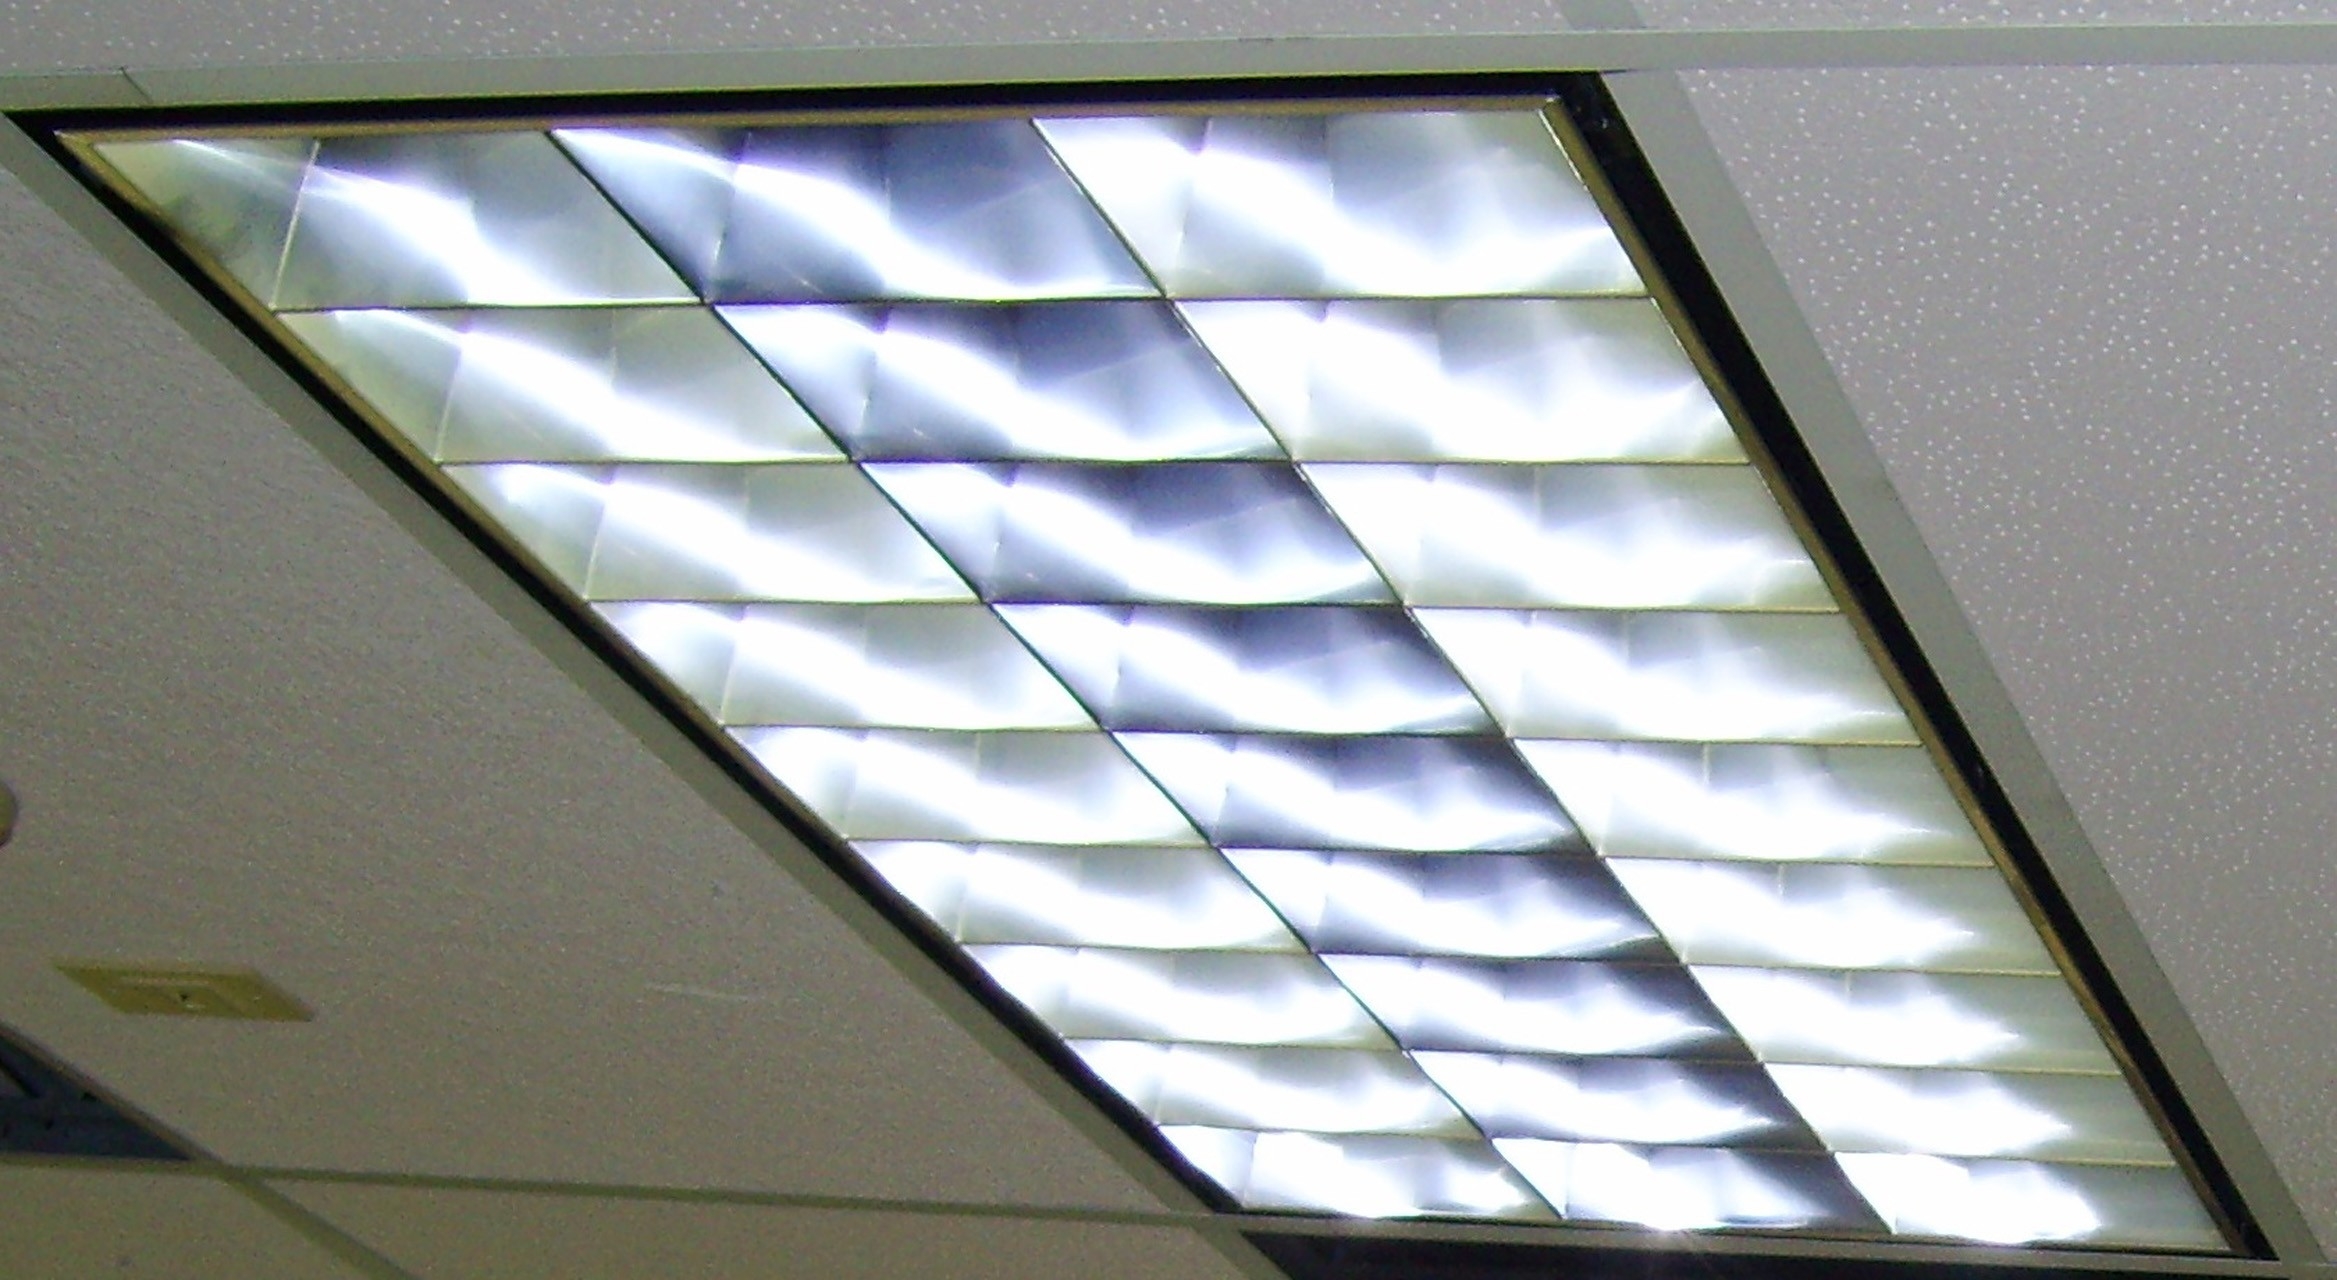 Permalink to Drop Ceiling Light Diffuser Panels